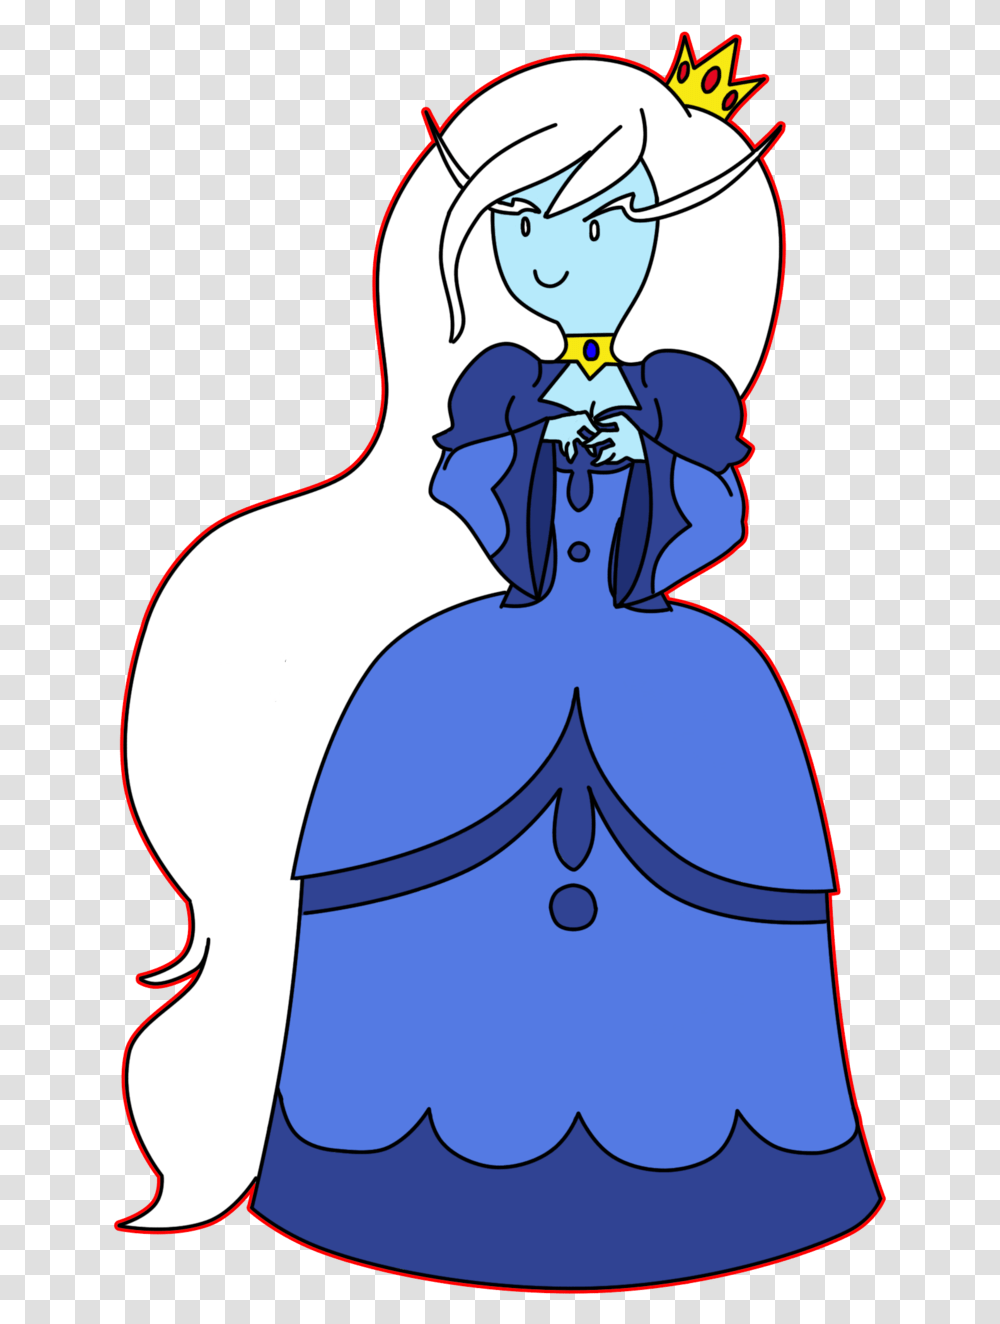 Ice Queen Adventure Time Princesses Ice Queen Adventure Time, Clothing, Graphics, Art, Pattern Transparent Png